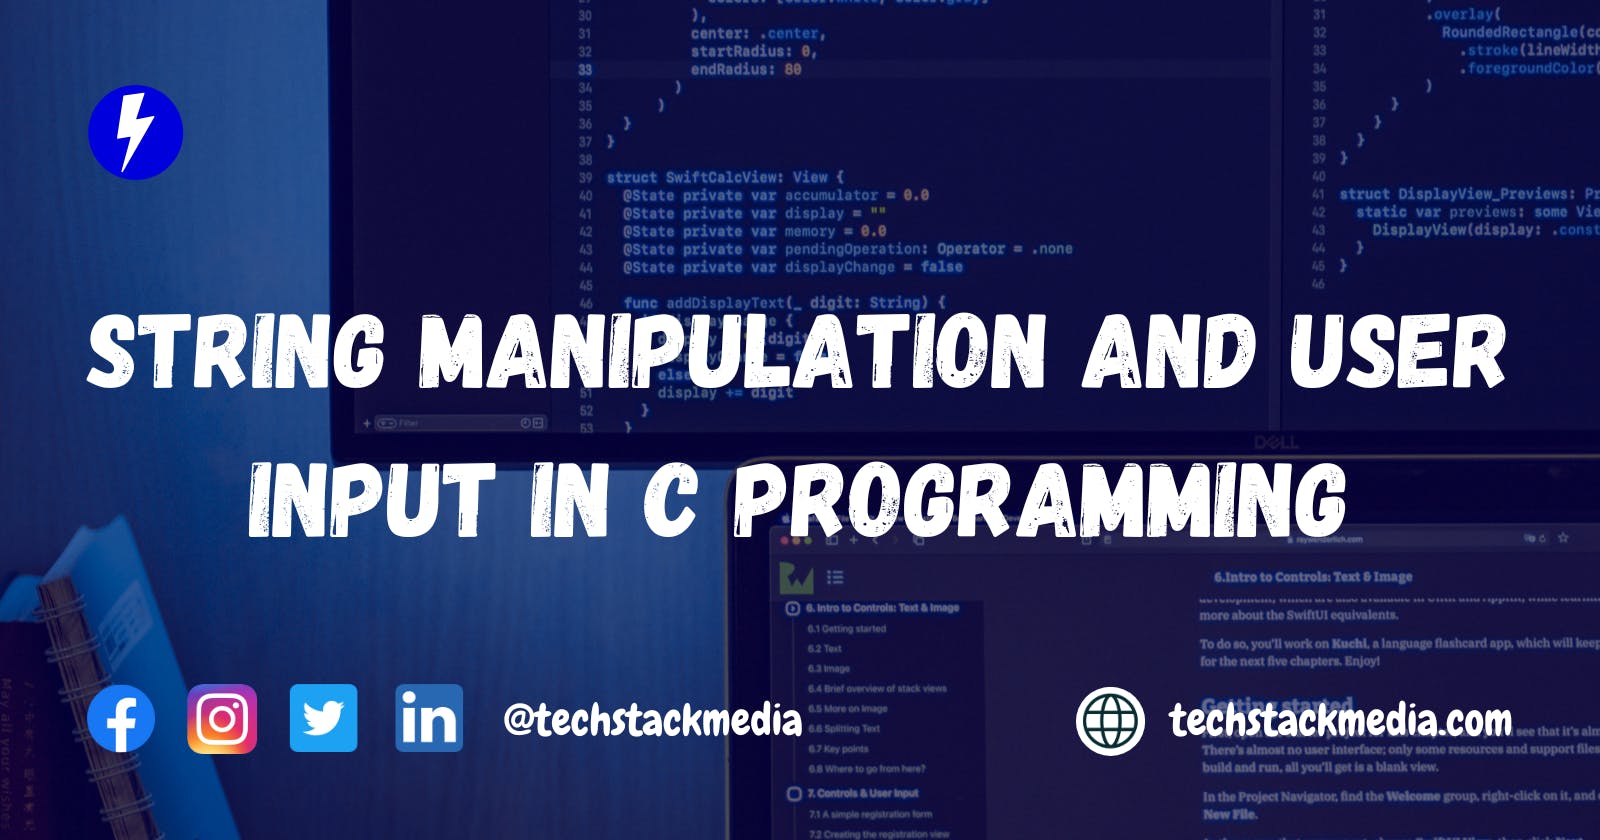 String Manipulation and User Input in C Programming